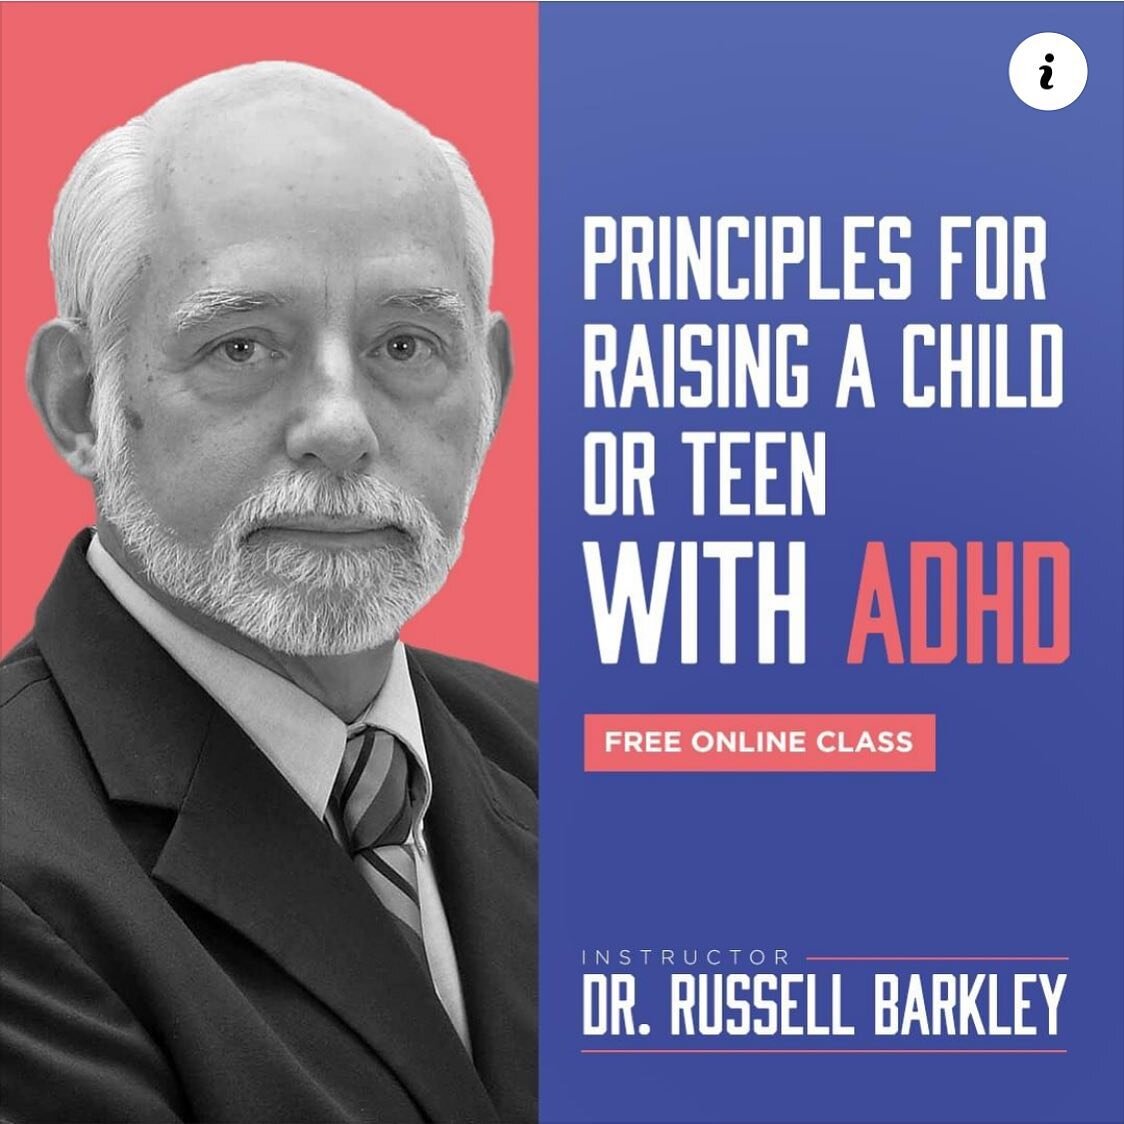 About the FREE class:
What are the best principles for raising a child or teen with ADHD? In this live class, Dr. Barkley will teach parents six of his 12 best principles from his 2020 book, 12 Principles for Raising a Child with ADHD. We'll begin wi